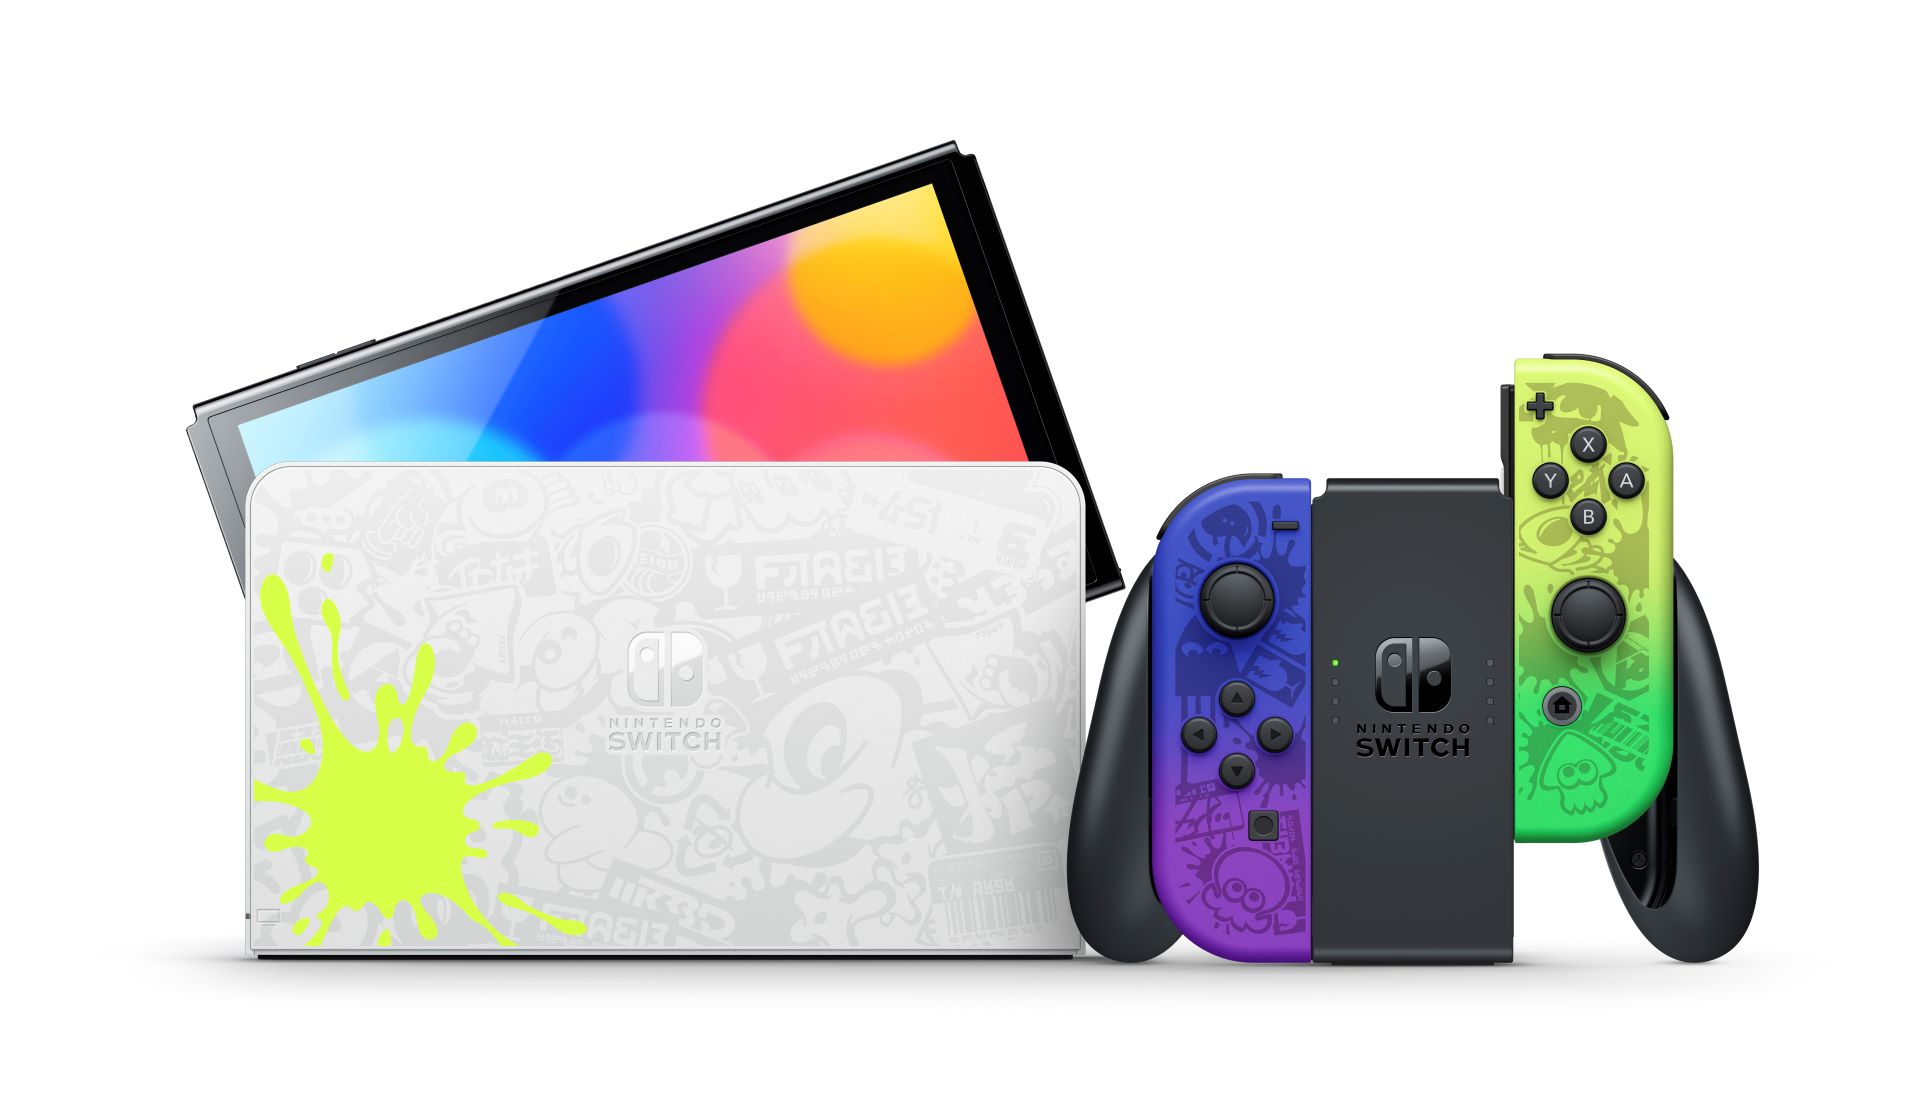 Splatoon 3-themed OLED Change coming this August - Starfield